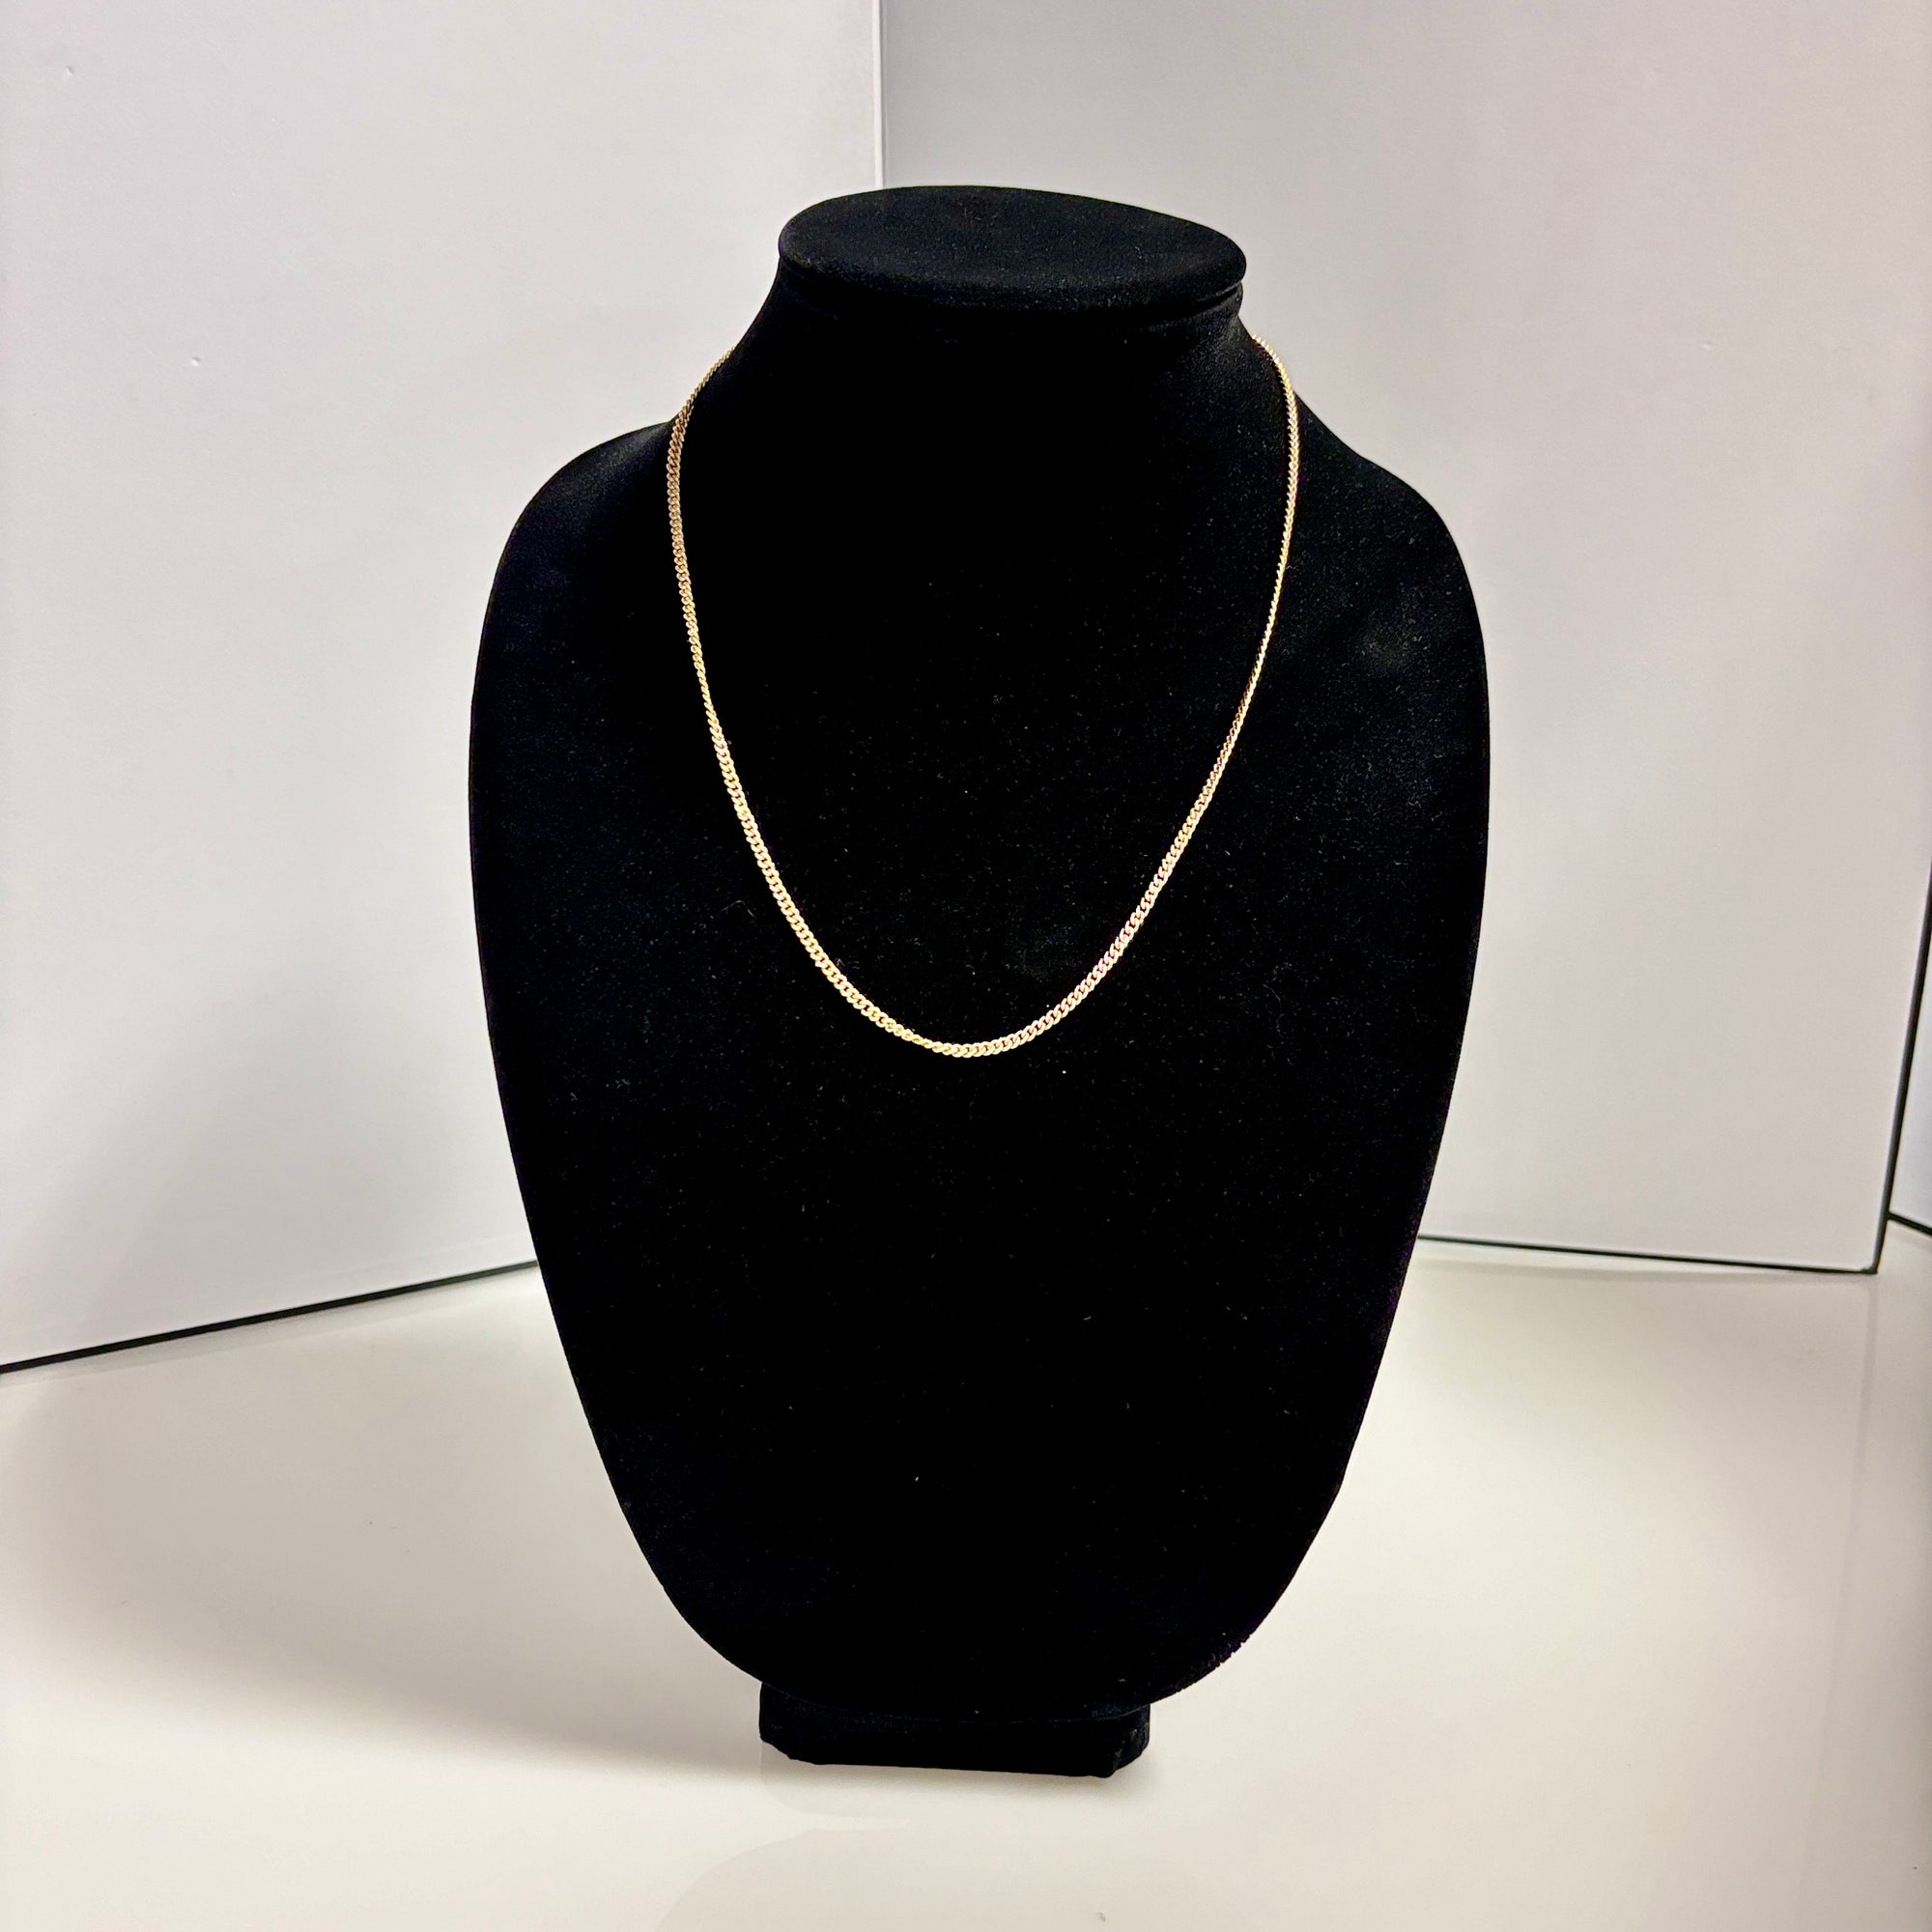 18k Yellow Gold Curb Chain | 20